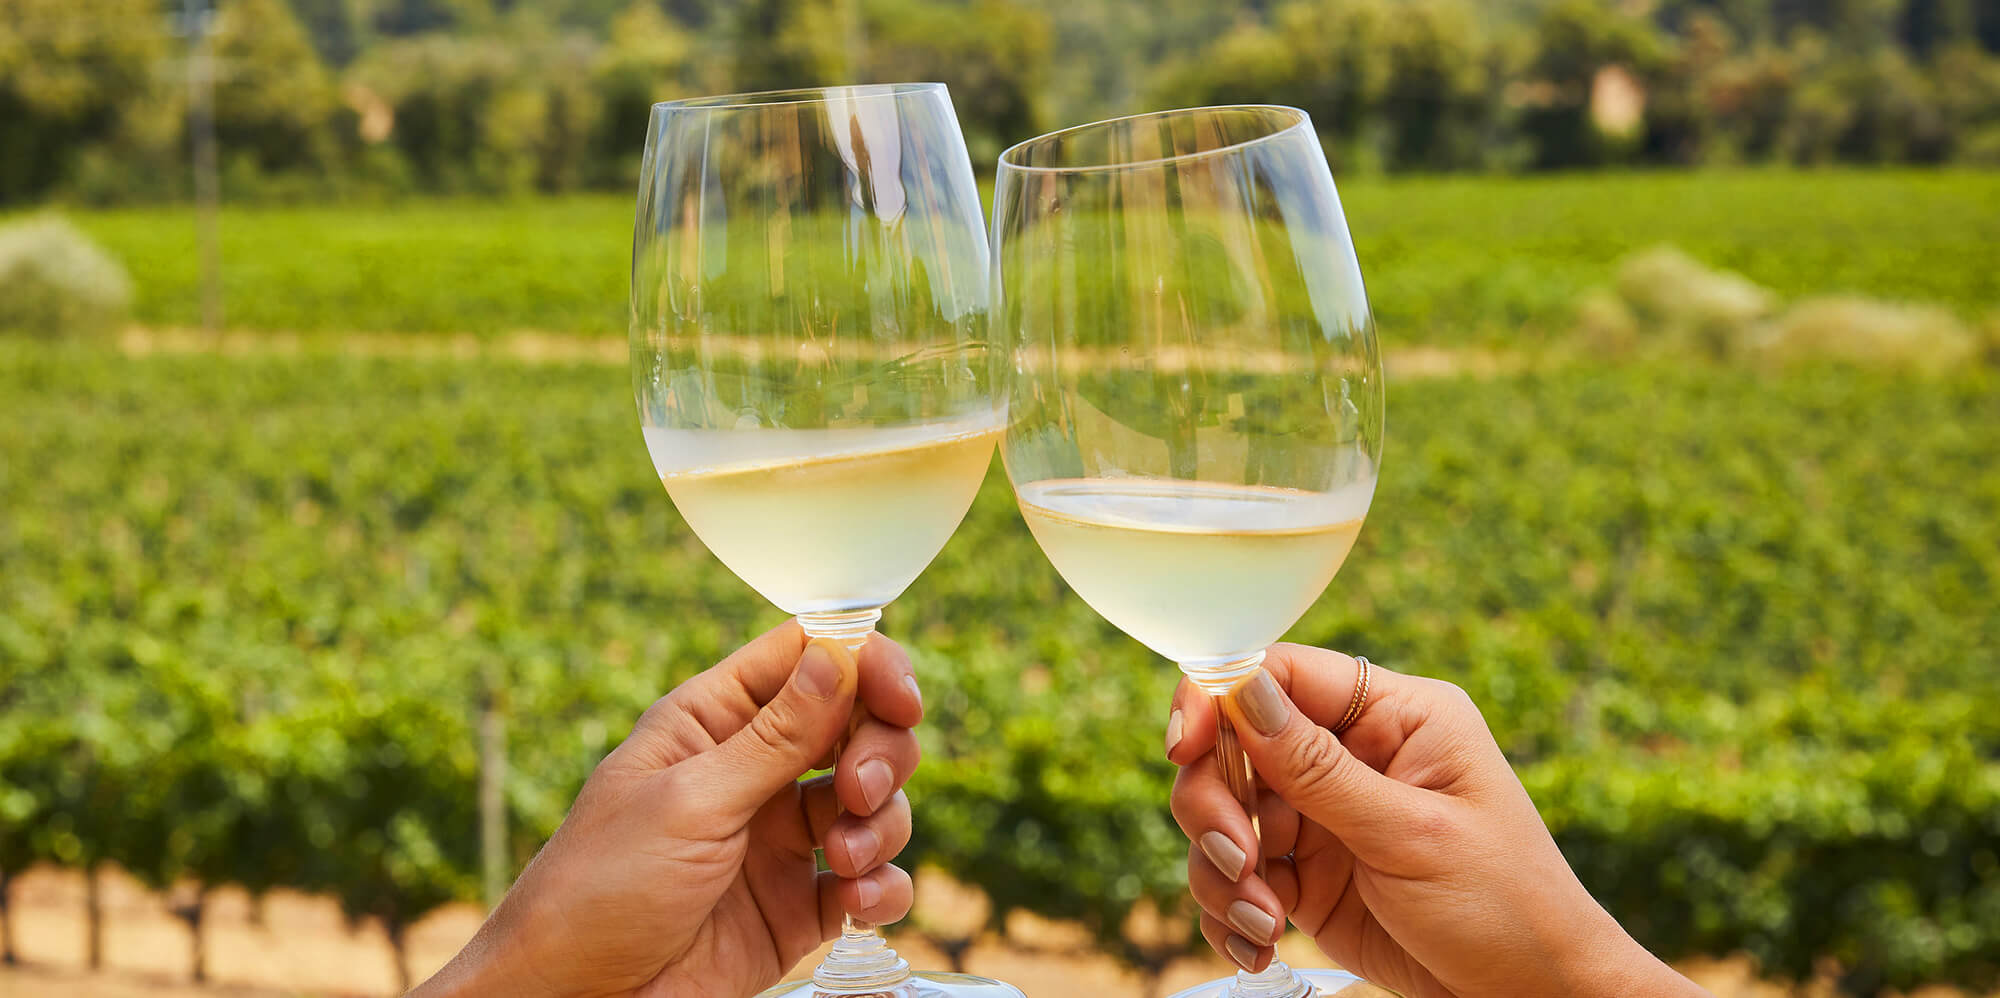 Cheers with two wine glasses clinking in front of a vast green vineyard.